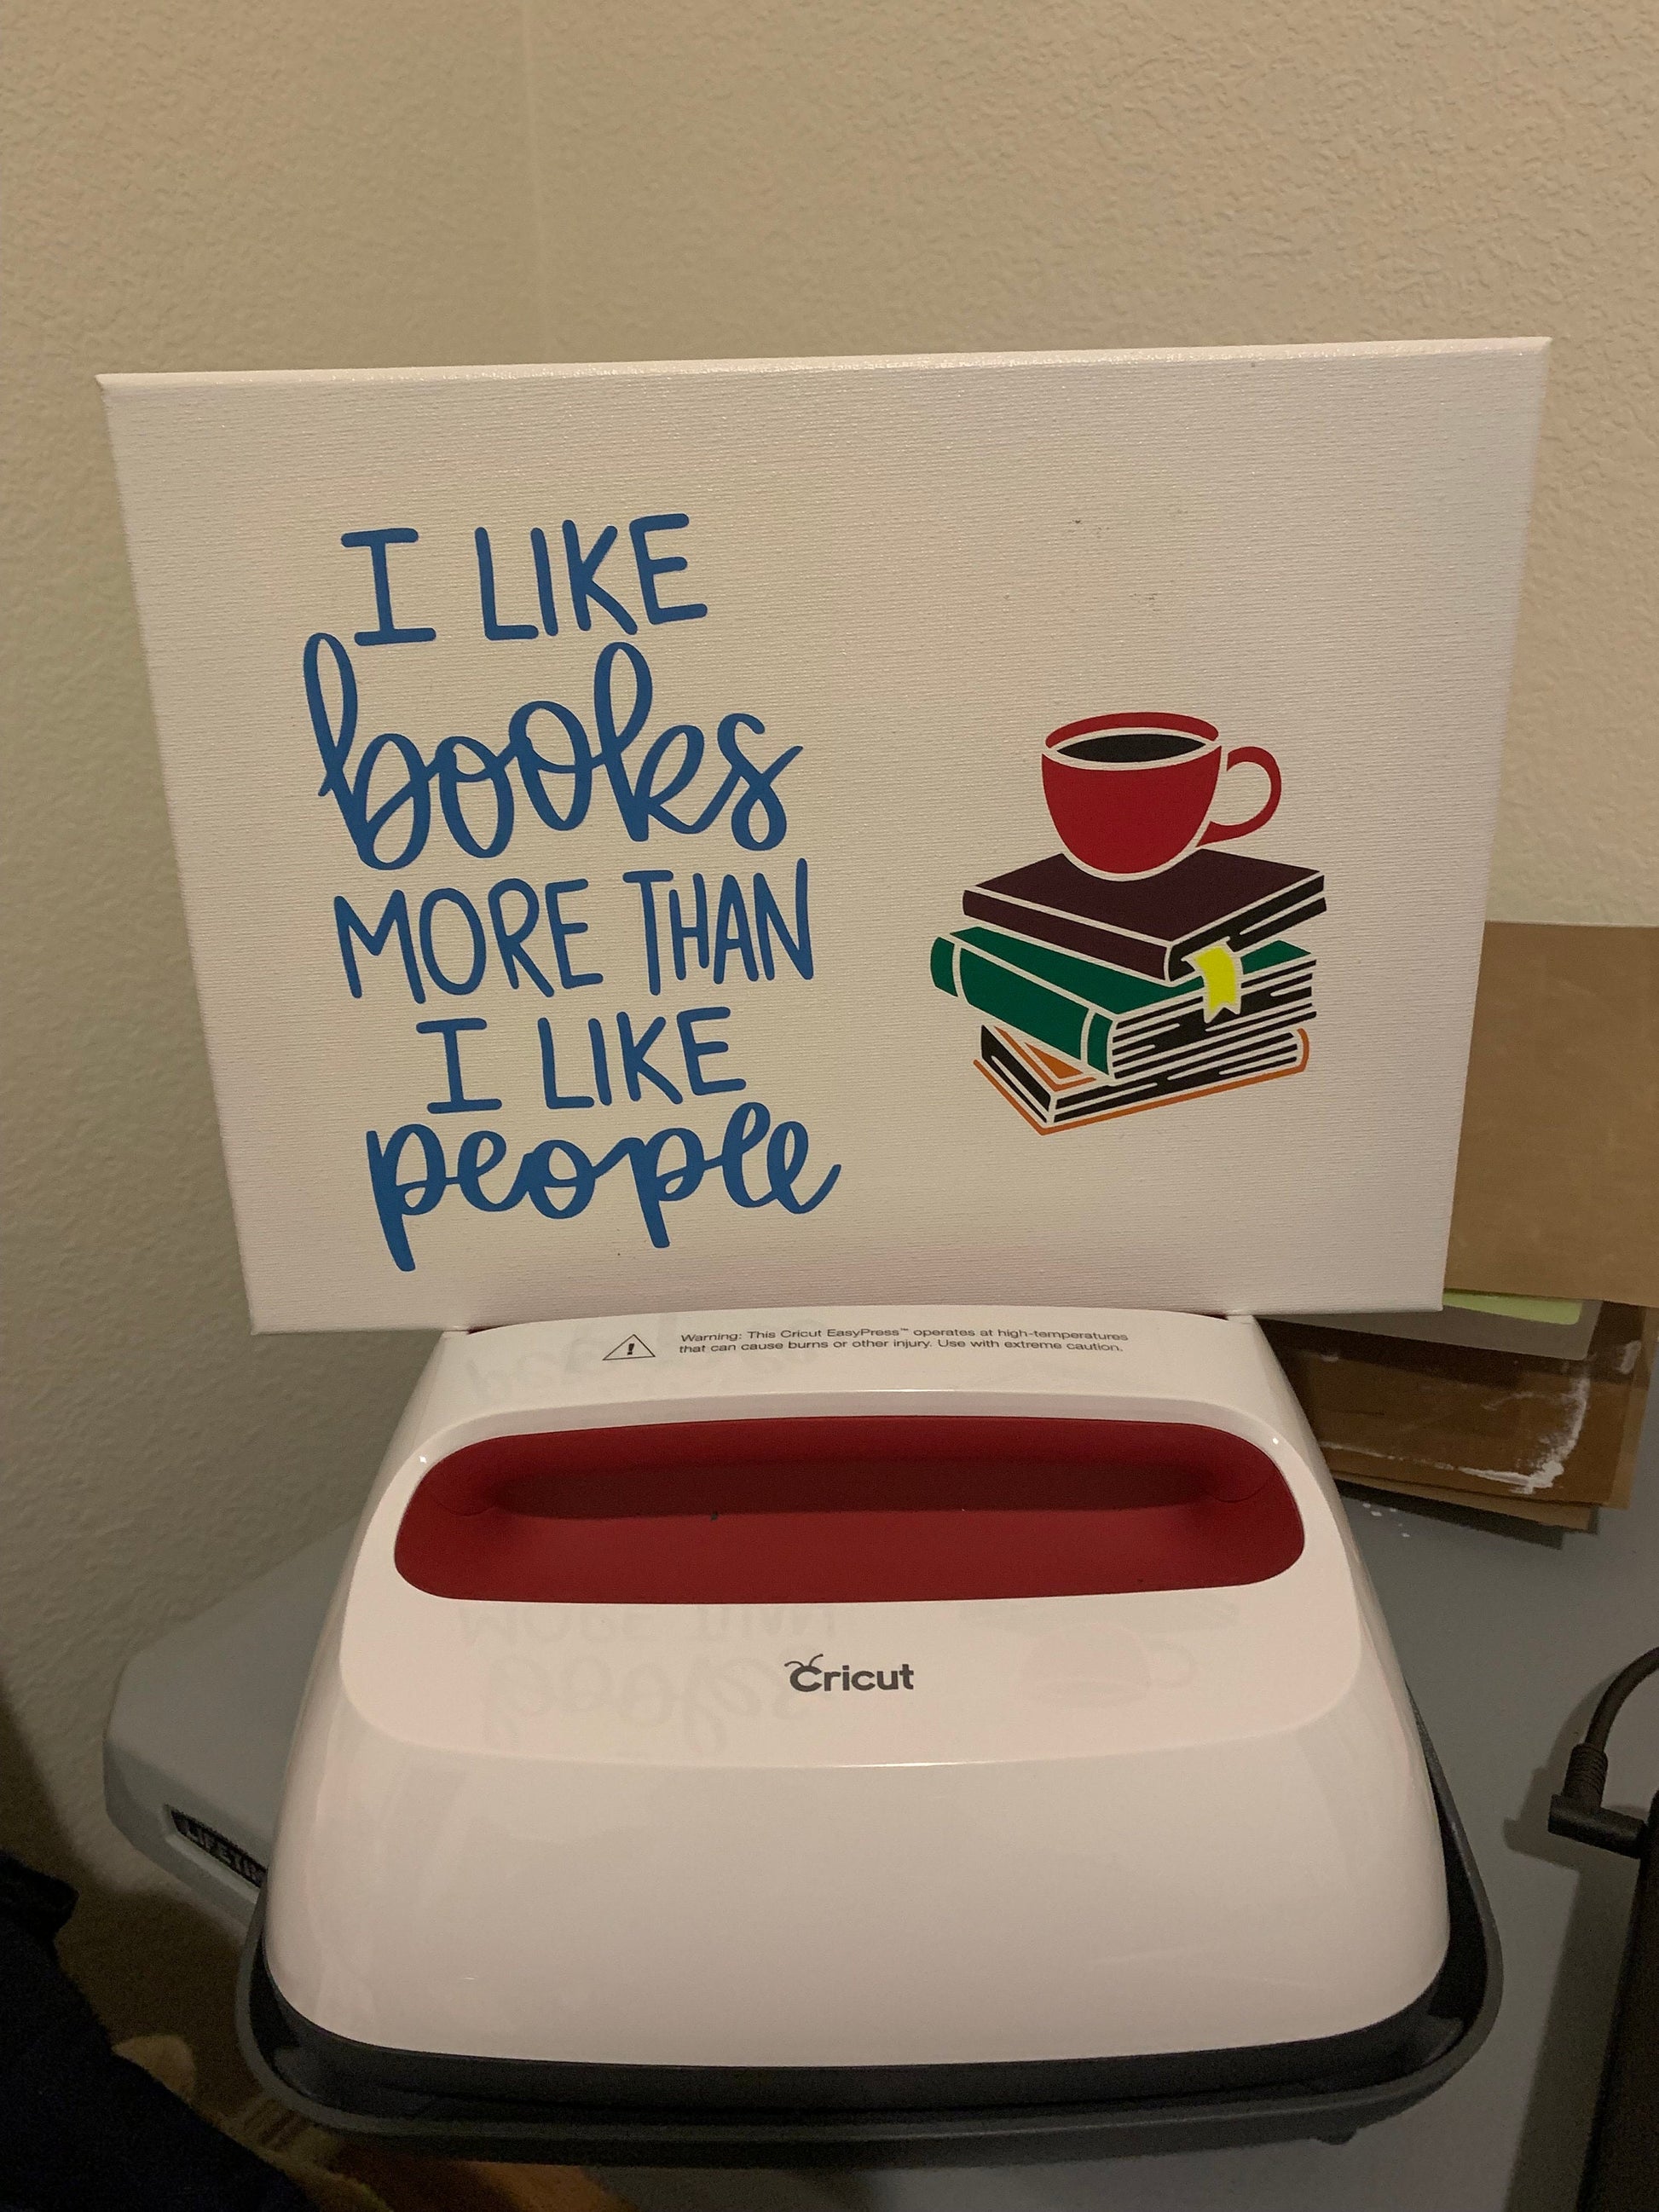 l like Books More Than People 9x12 Vinyl Canvas Sign blue, green